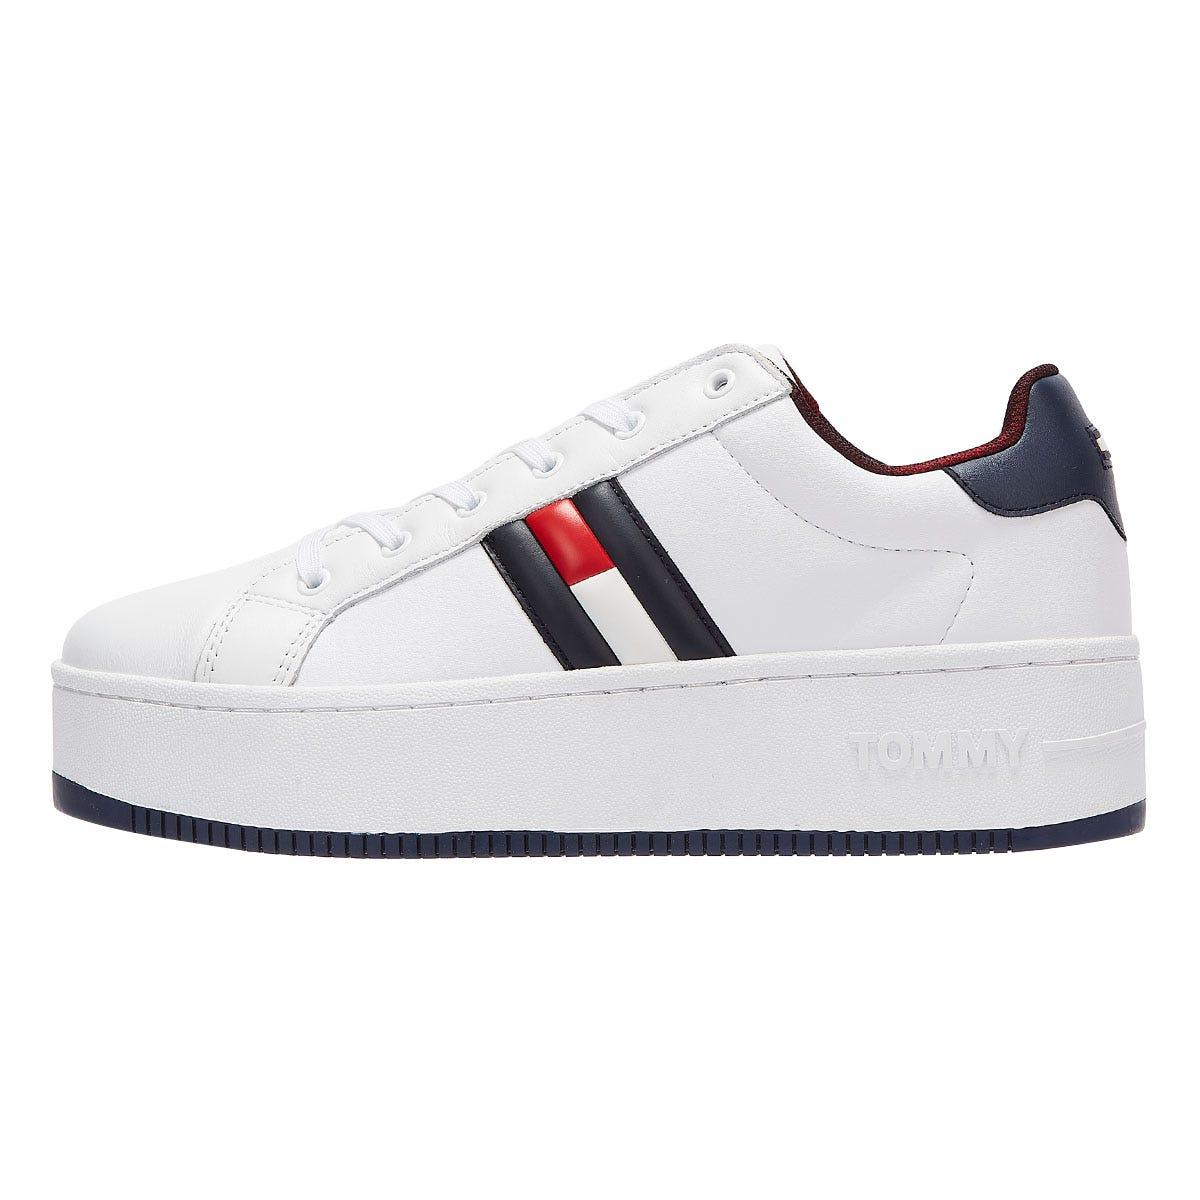 Tommy Hilfiger Denim Tommy Jeans Iconic Flag Flatform Trainers in White -  Lyst